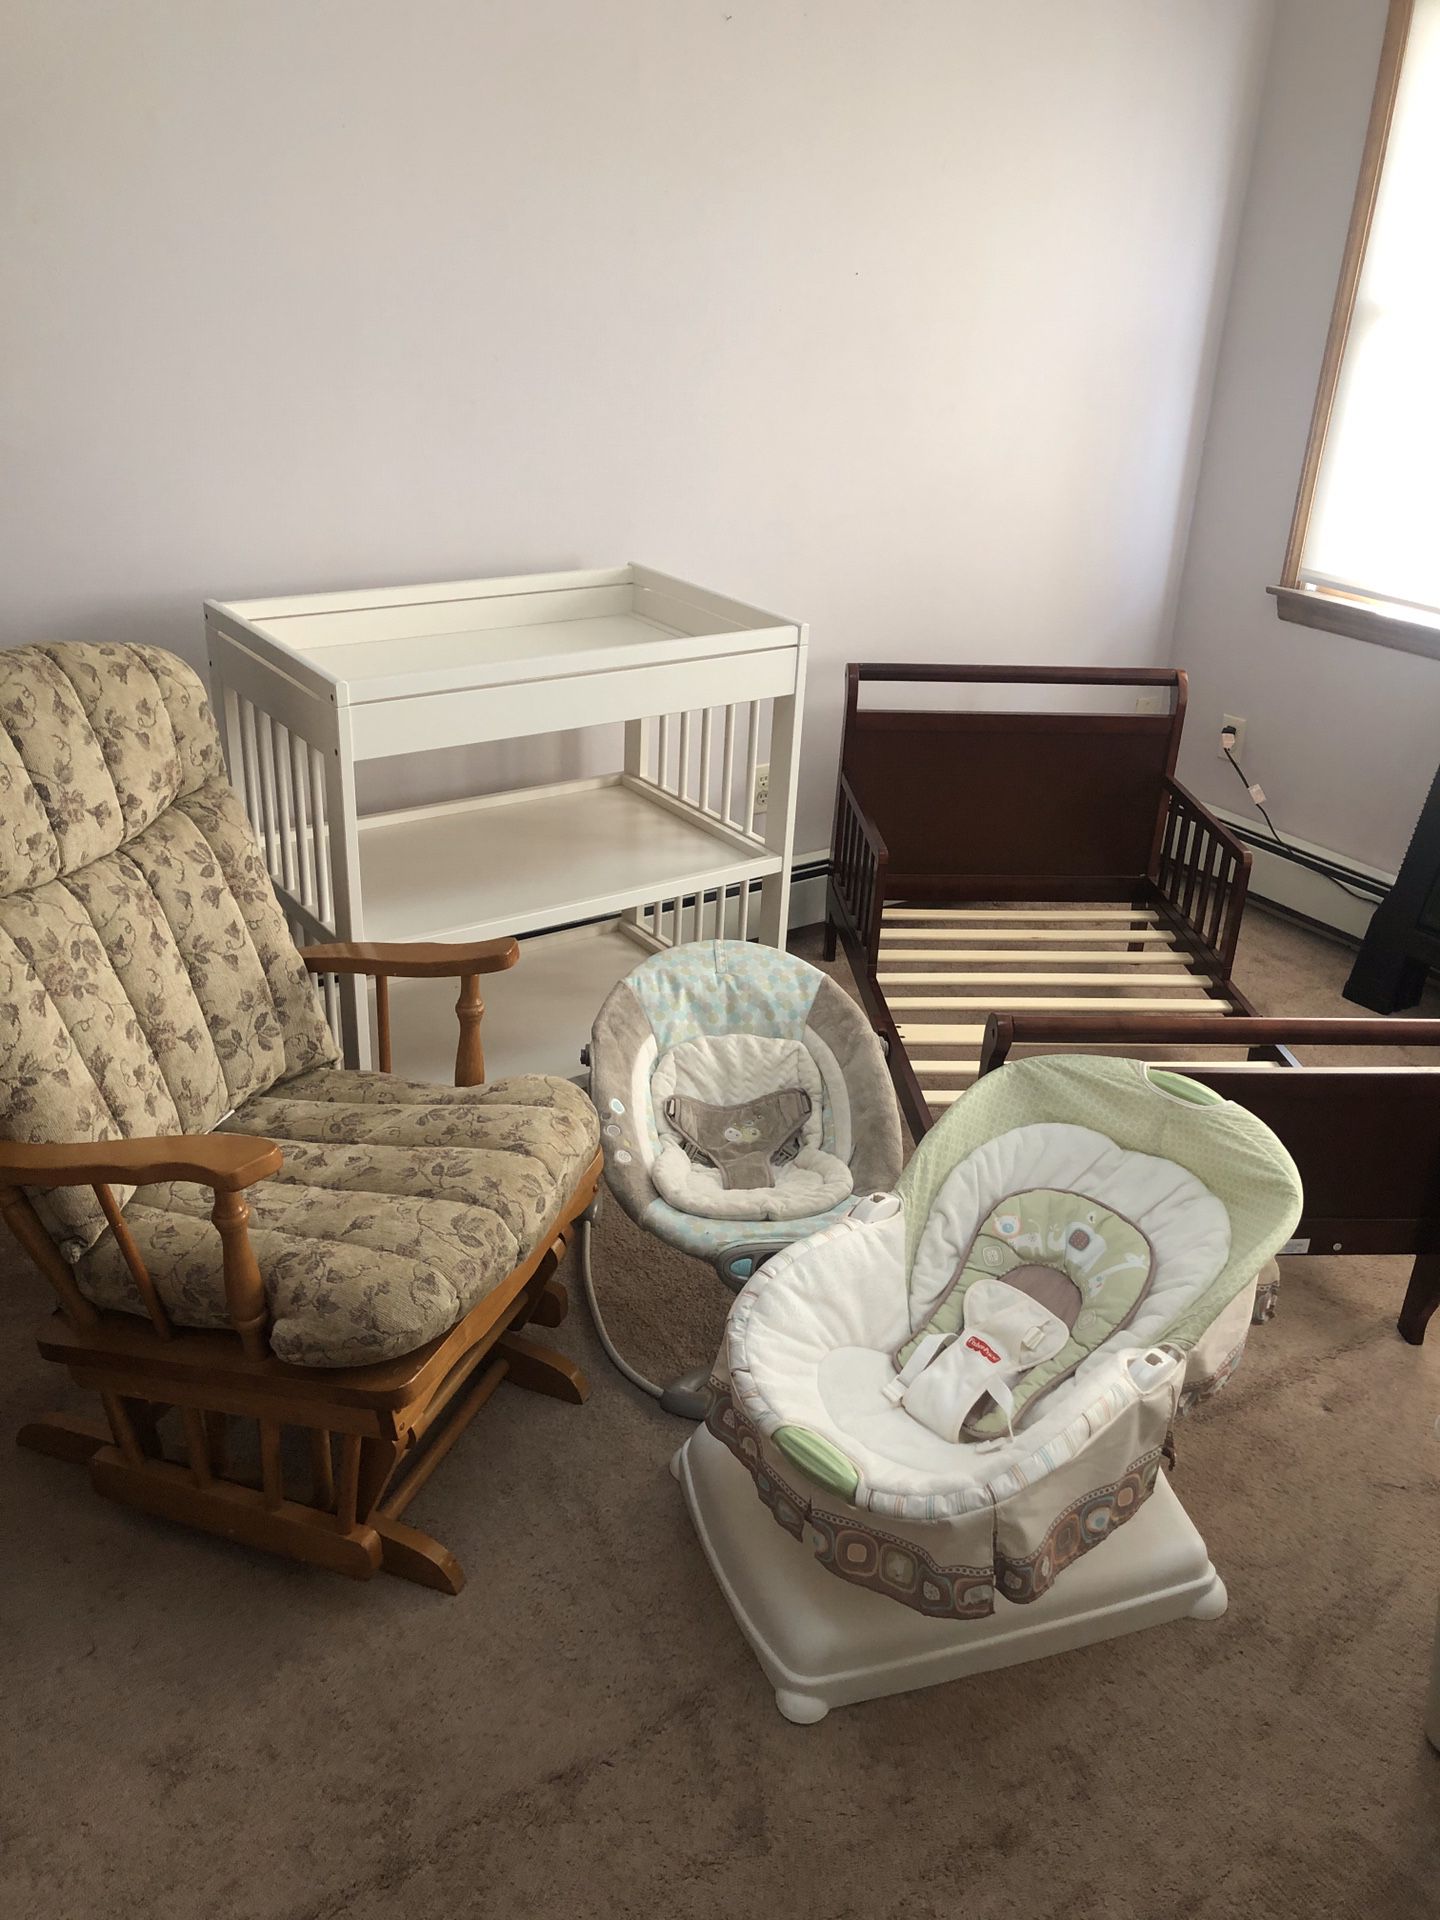 Baby rockers, changing table and toddler bed